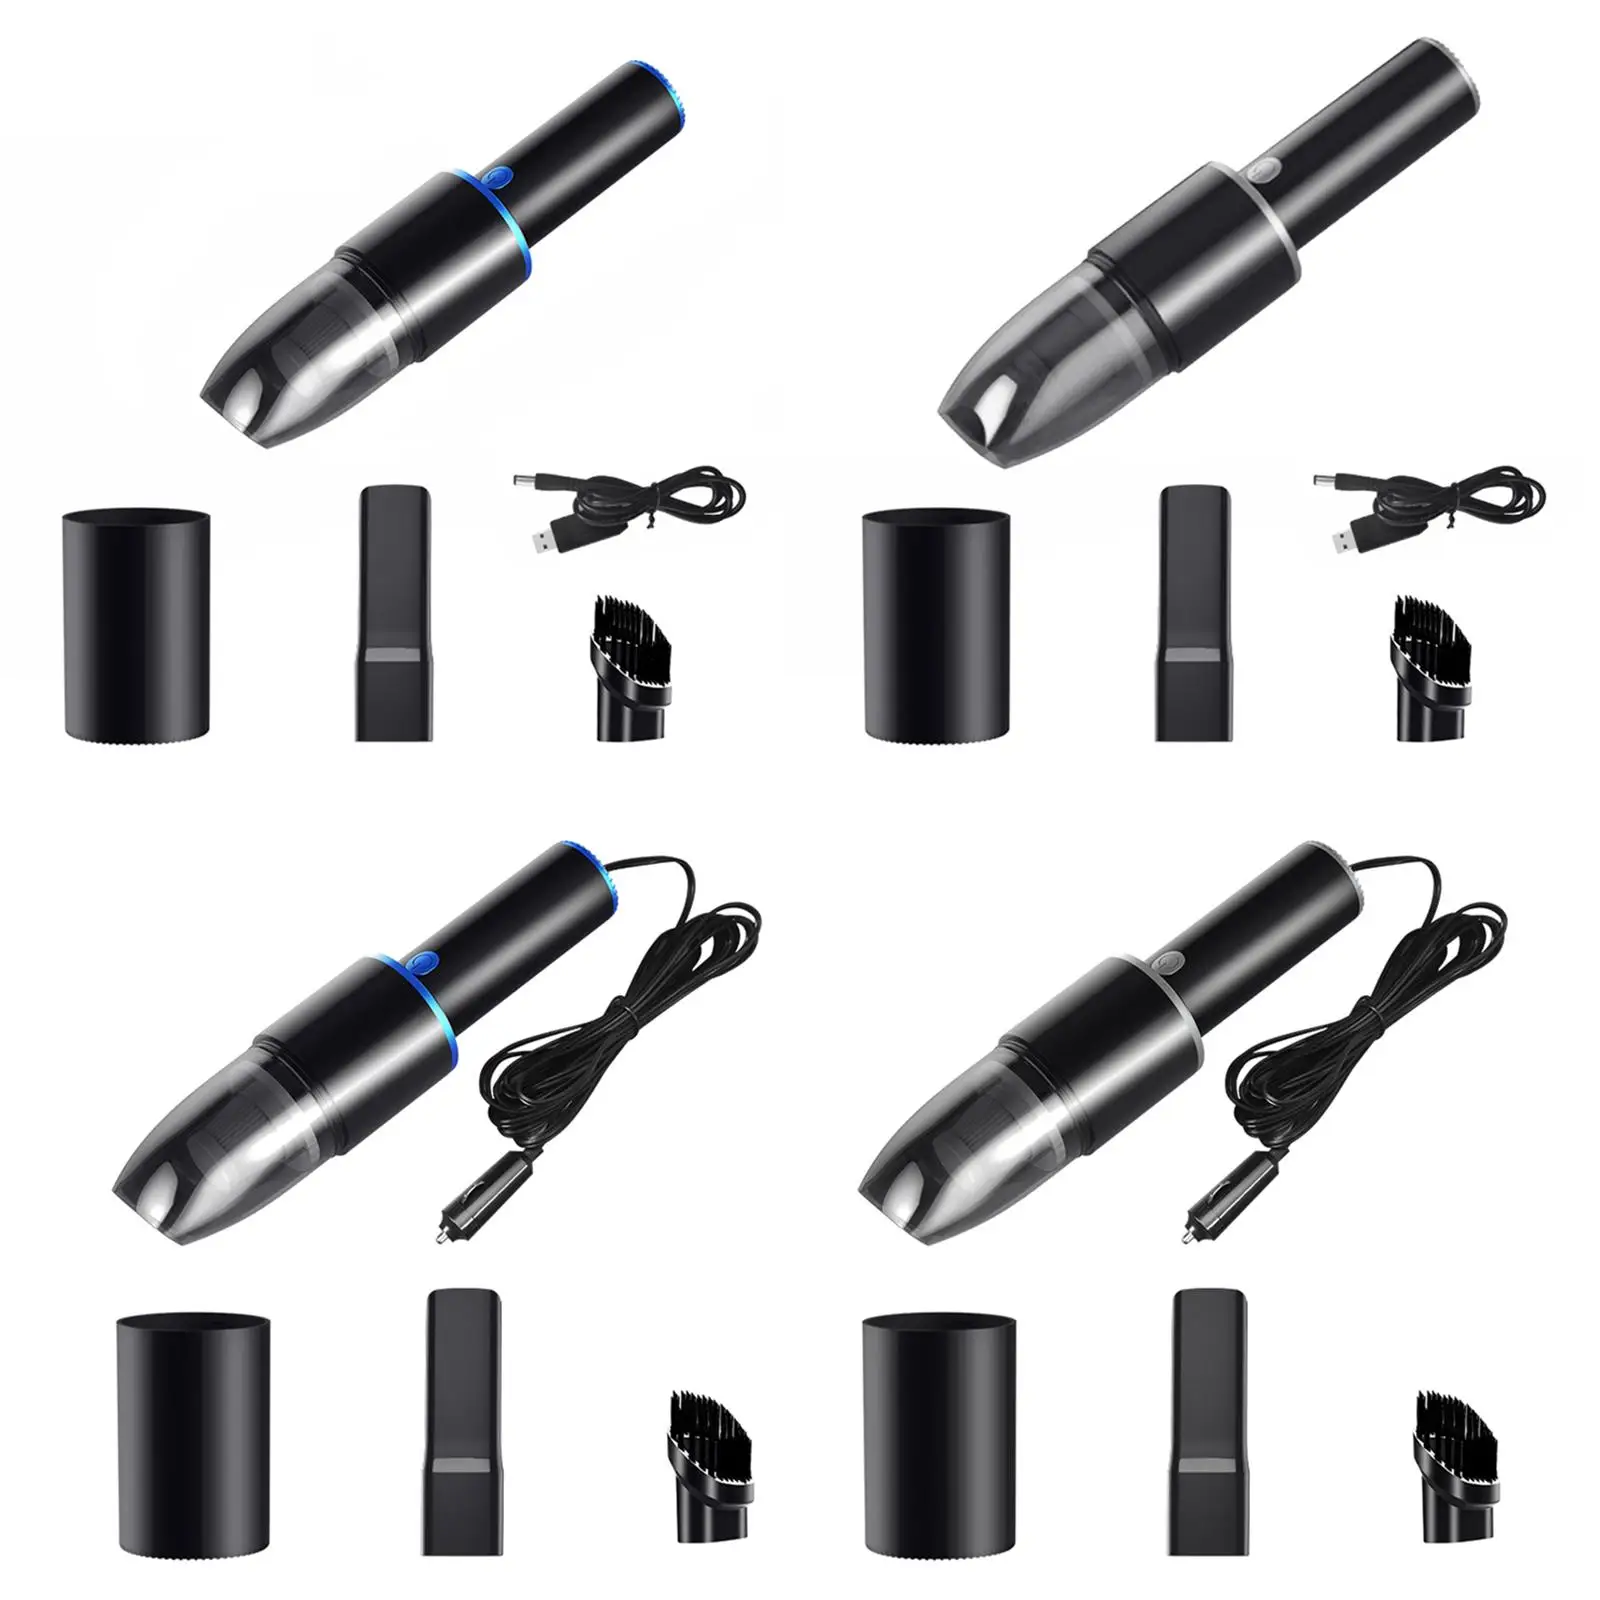 Portable Car Vacuum Cleaner Mini Washable Handheld Vacuum Fit for Pet Hair Home Car Interior Clean Fast Charge USB Rechargeable